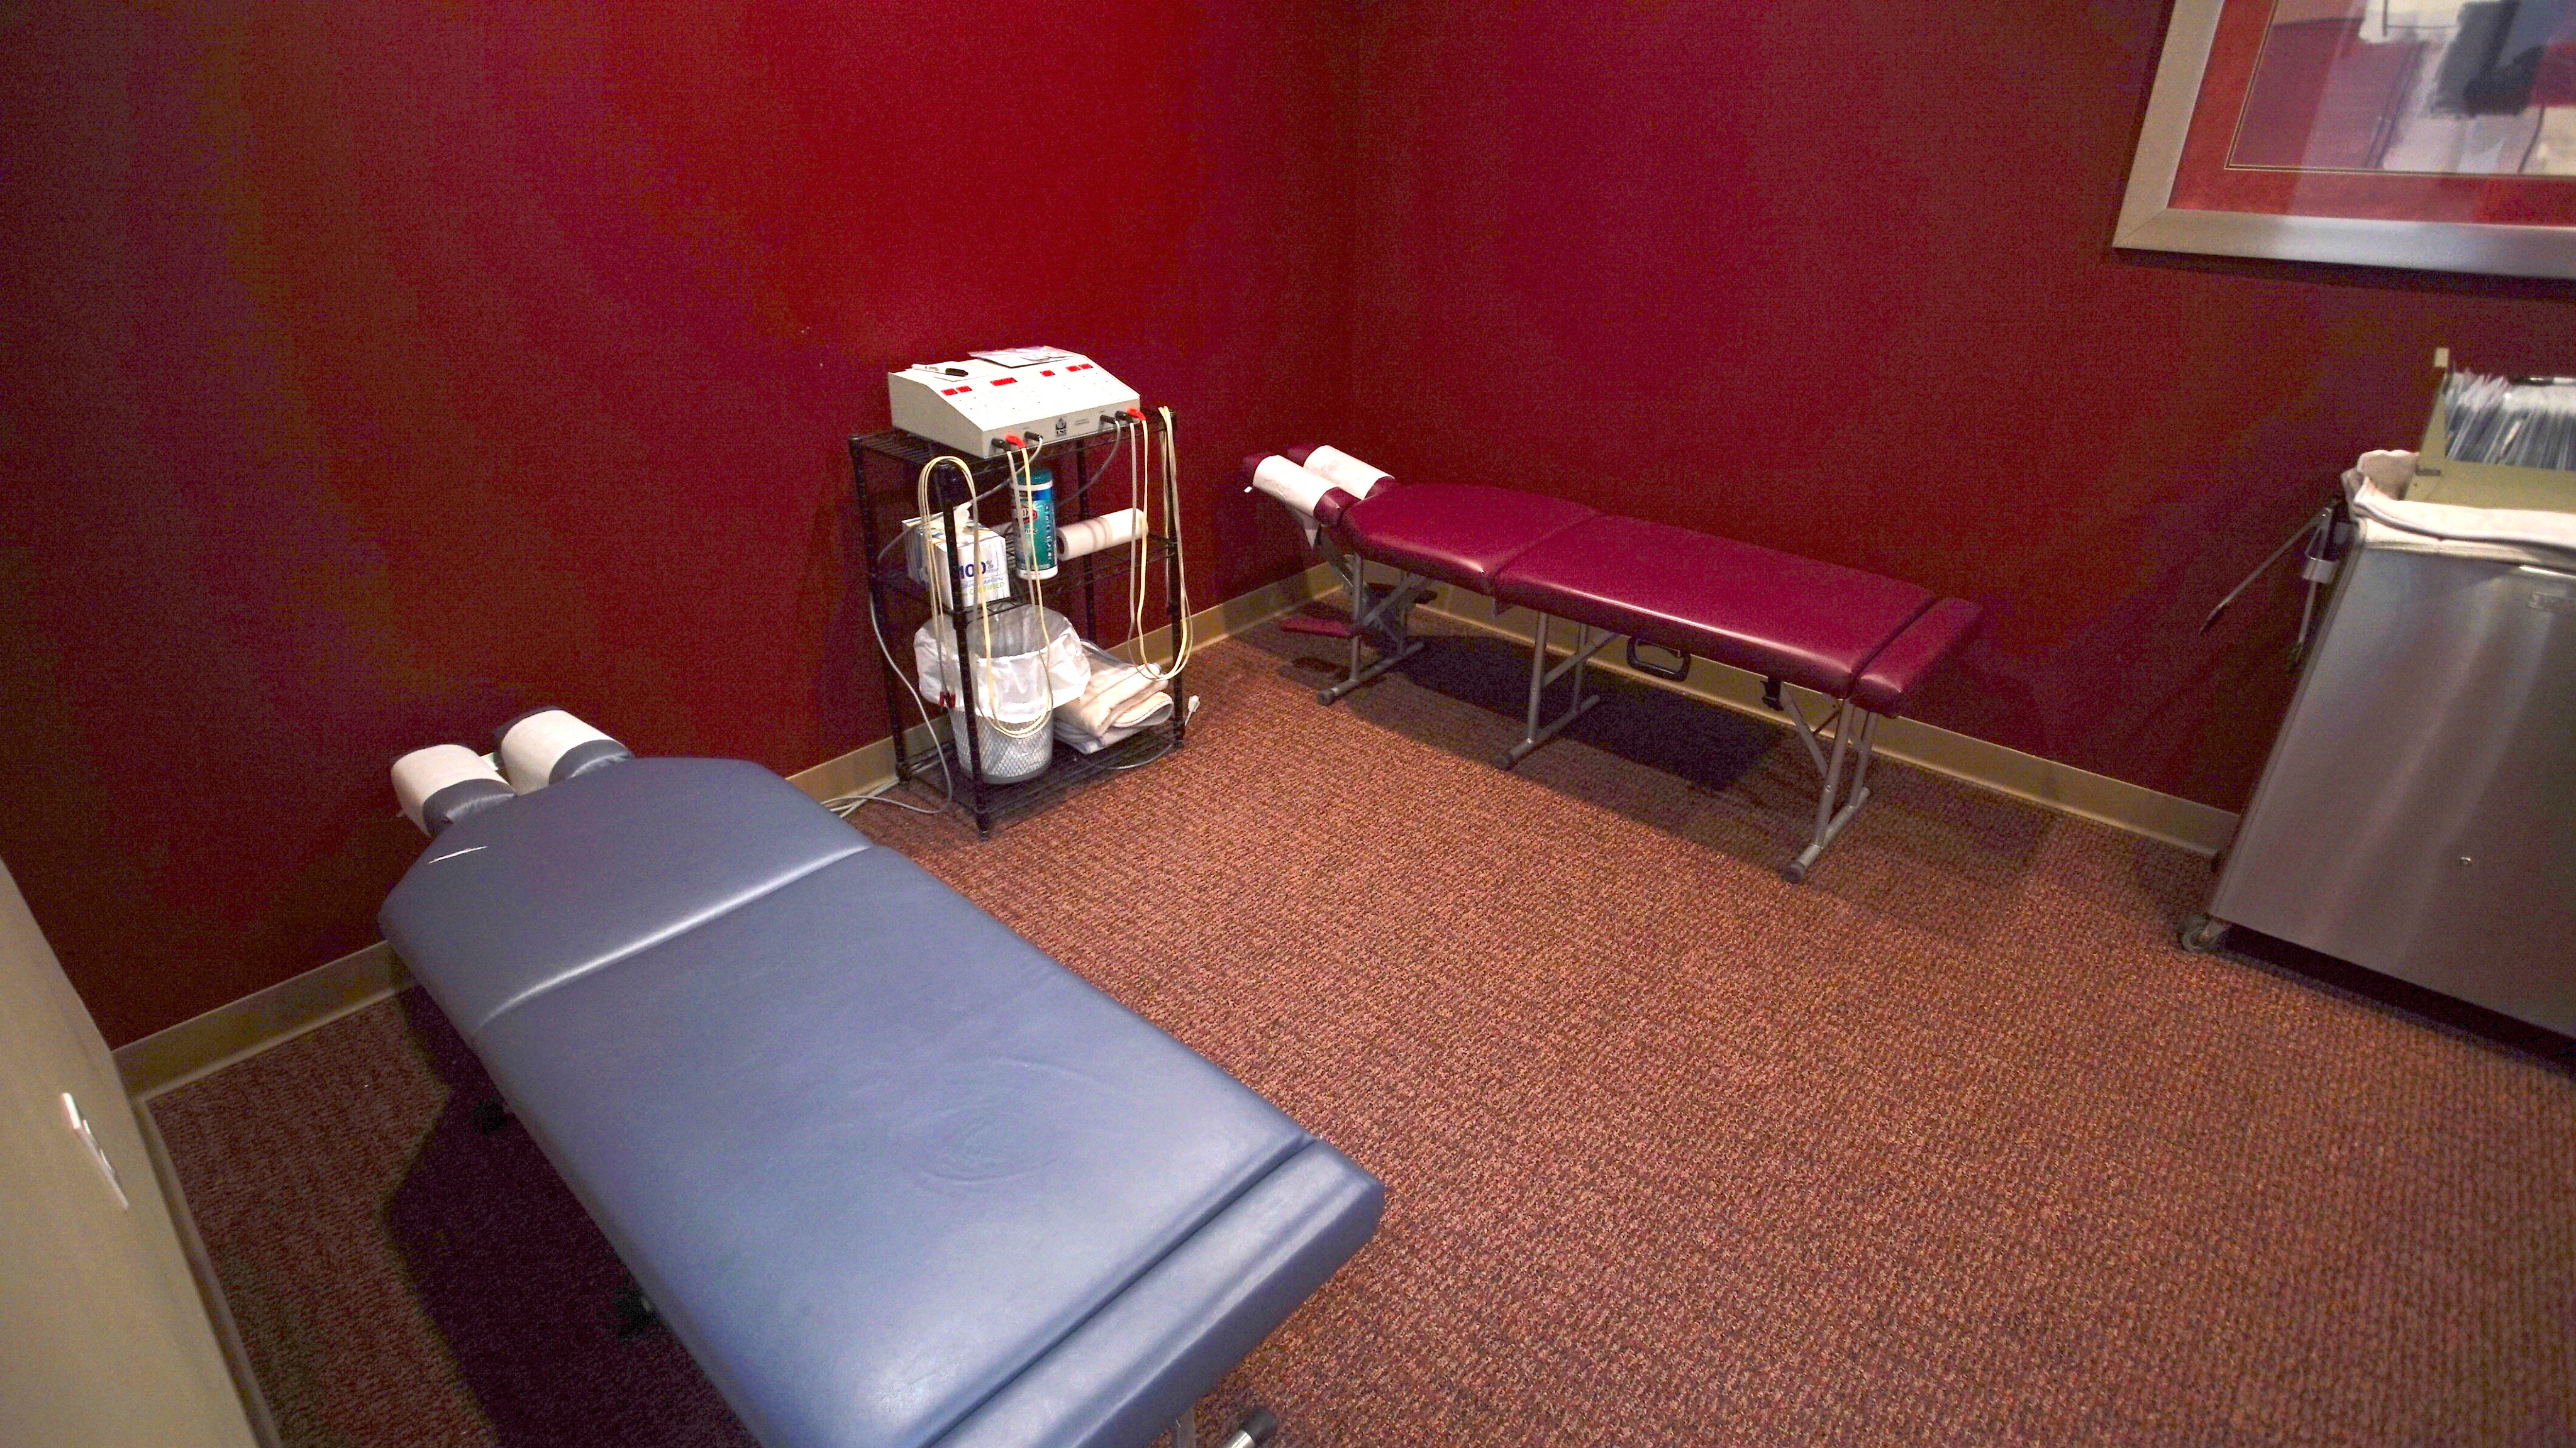 Electrical muscle stimulation machine and therapy tables